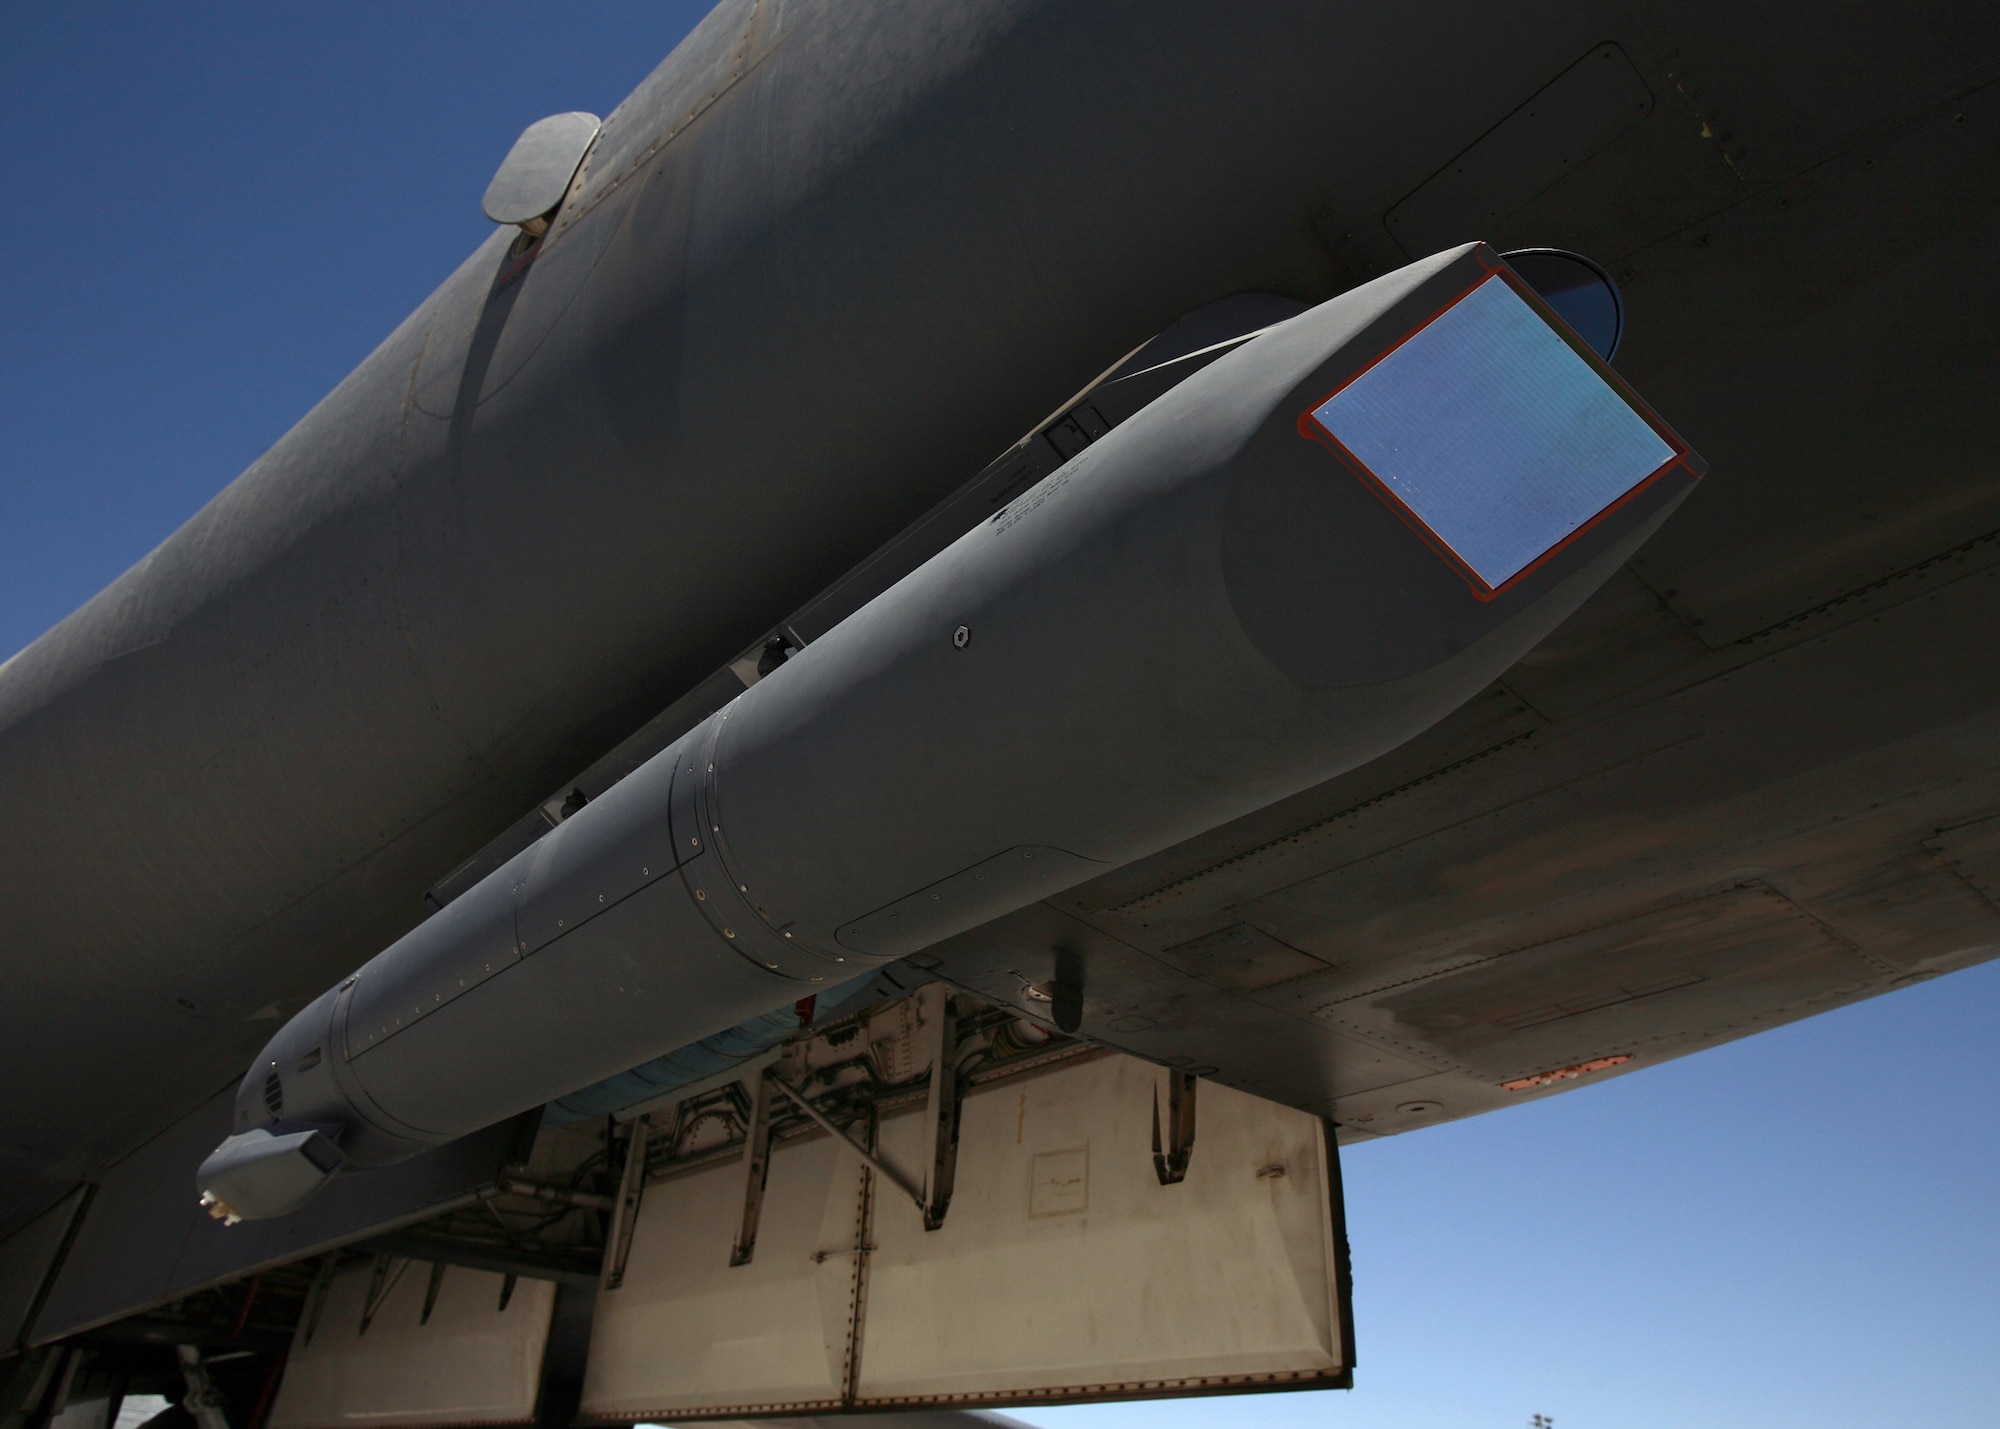 A sniper pod is mounted on the lower right of a B-1B Lancer fuselage. The sniper pod allows the aircrew to positively identify a target and quickly assess battle damage after an attack. (Air Force photo by Jet Fabara)